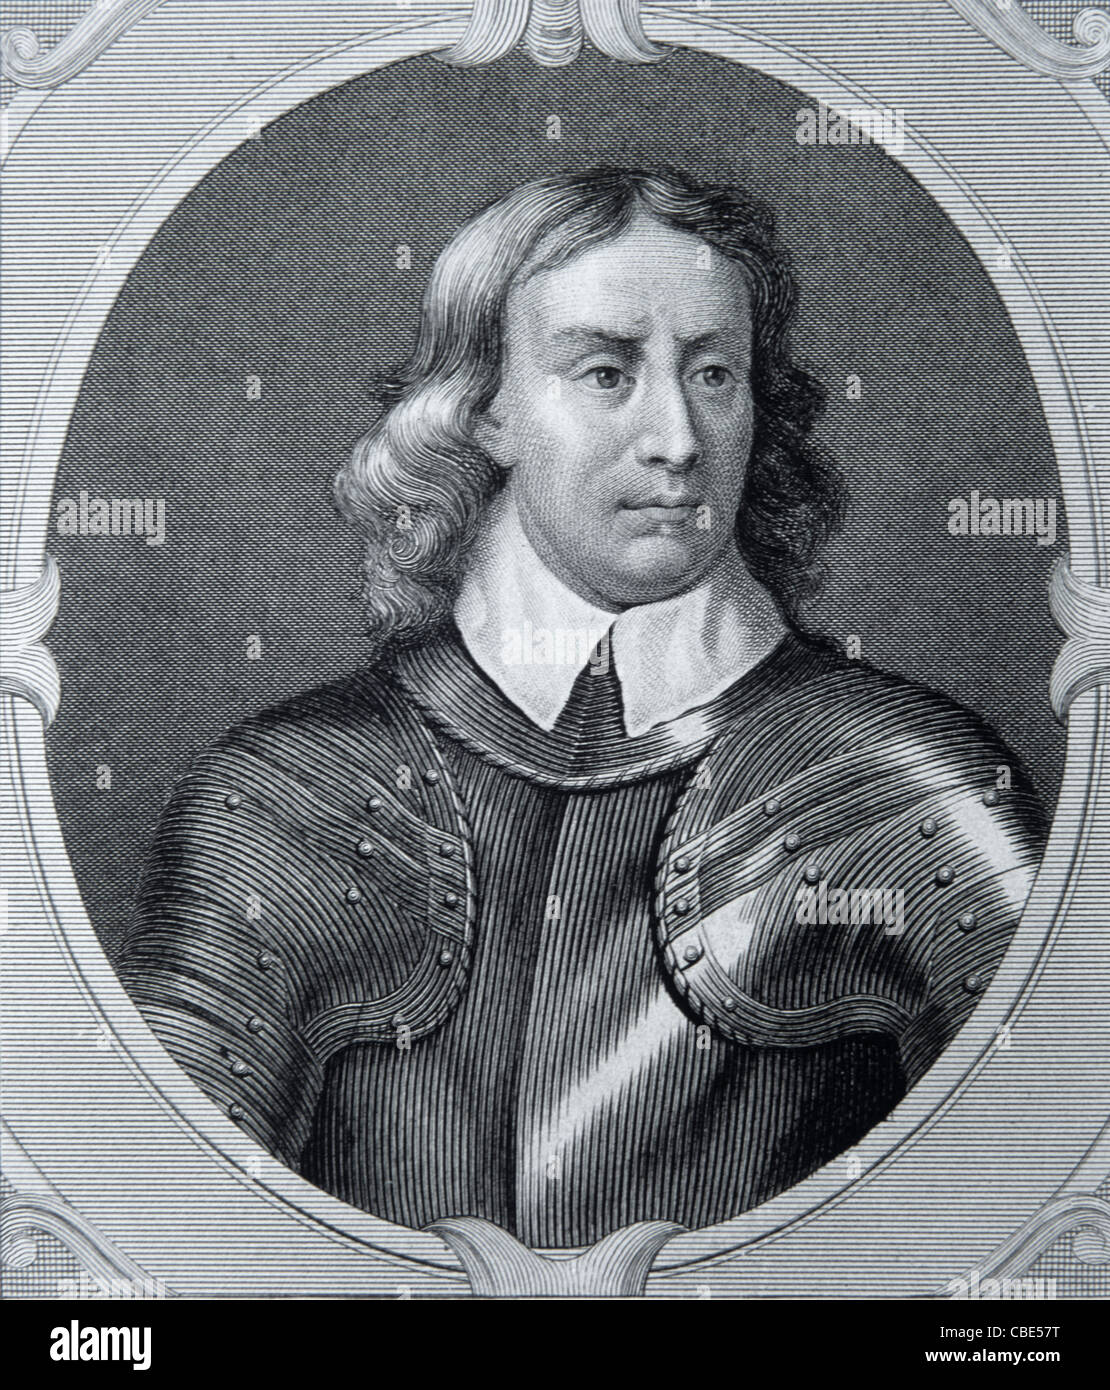 Portrait of Oliver Cromwell (1599-1658) English Soldier and Statesman. Portrait Dressed in Body Armour or Body Armor. c19th Engraving.or Vintage Illustration Stock Photo